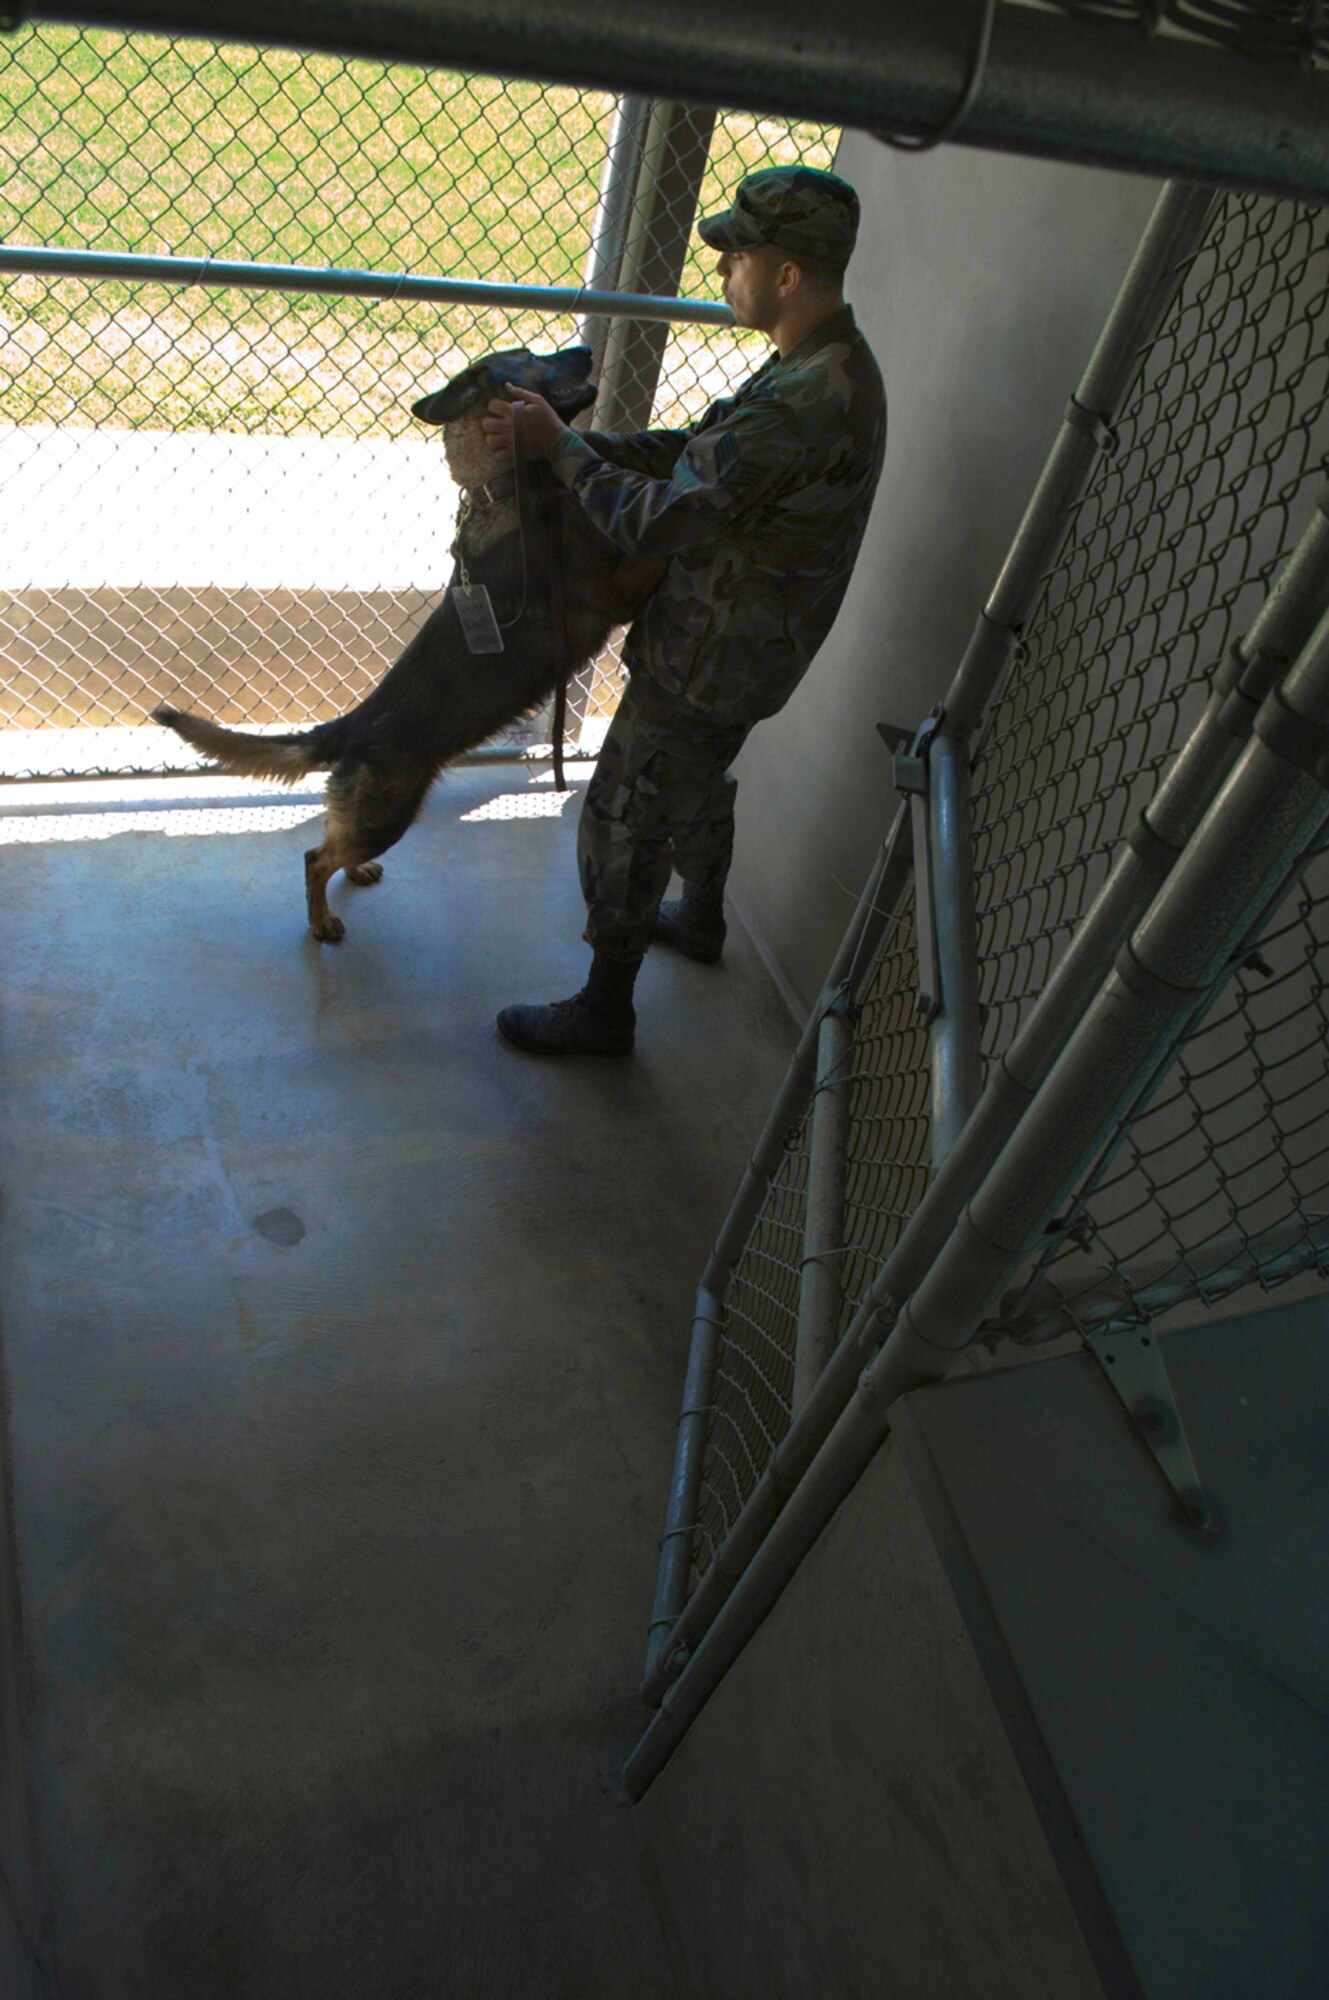 After a hard day of training, Staff Sgt. Alexander cares for a dog after returning him to his kennel. (photo by Tech. Sgt. Matthew Hannen)